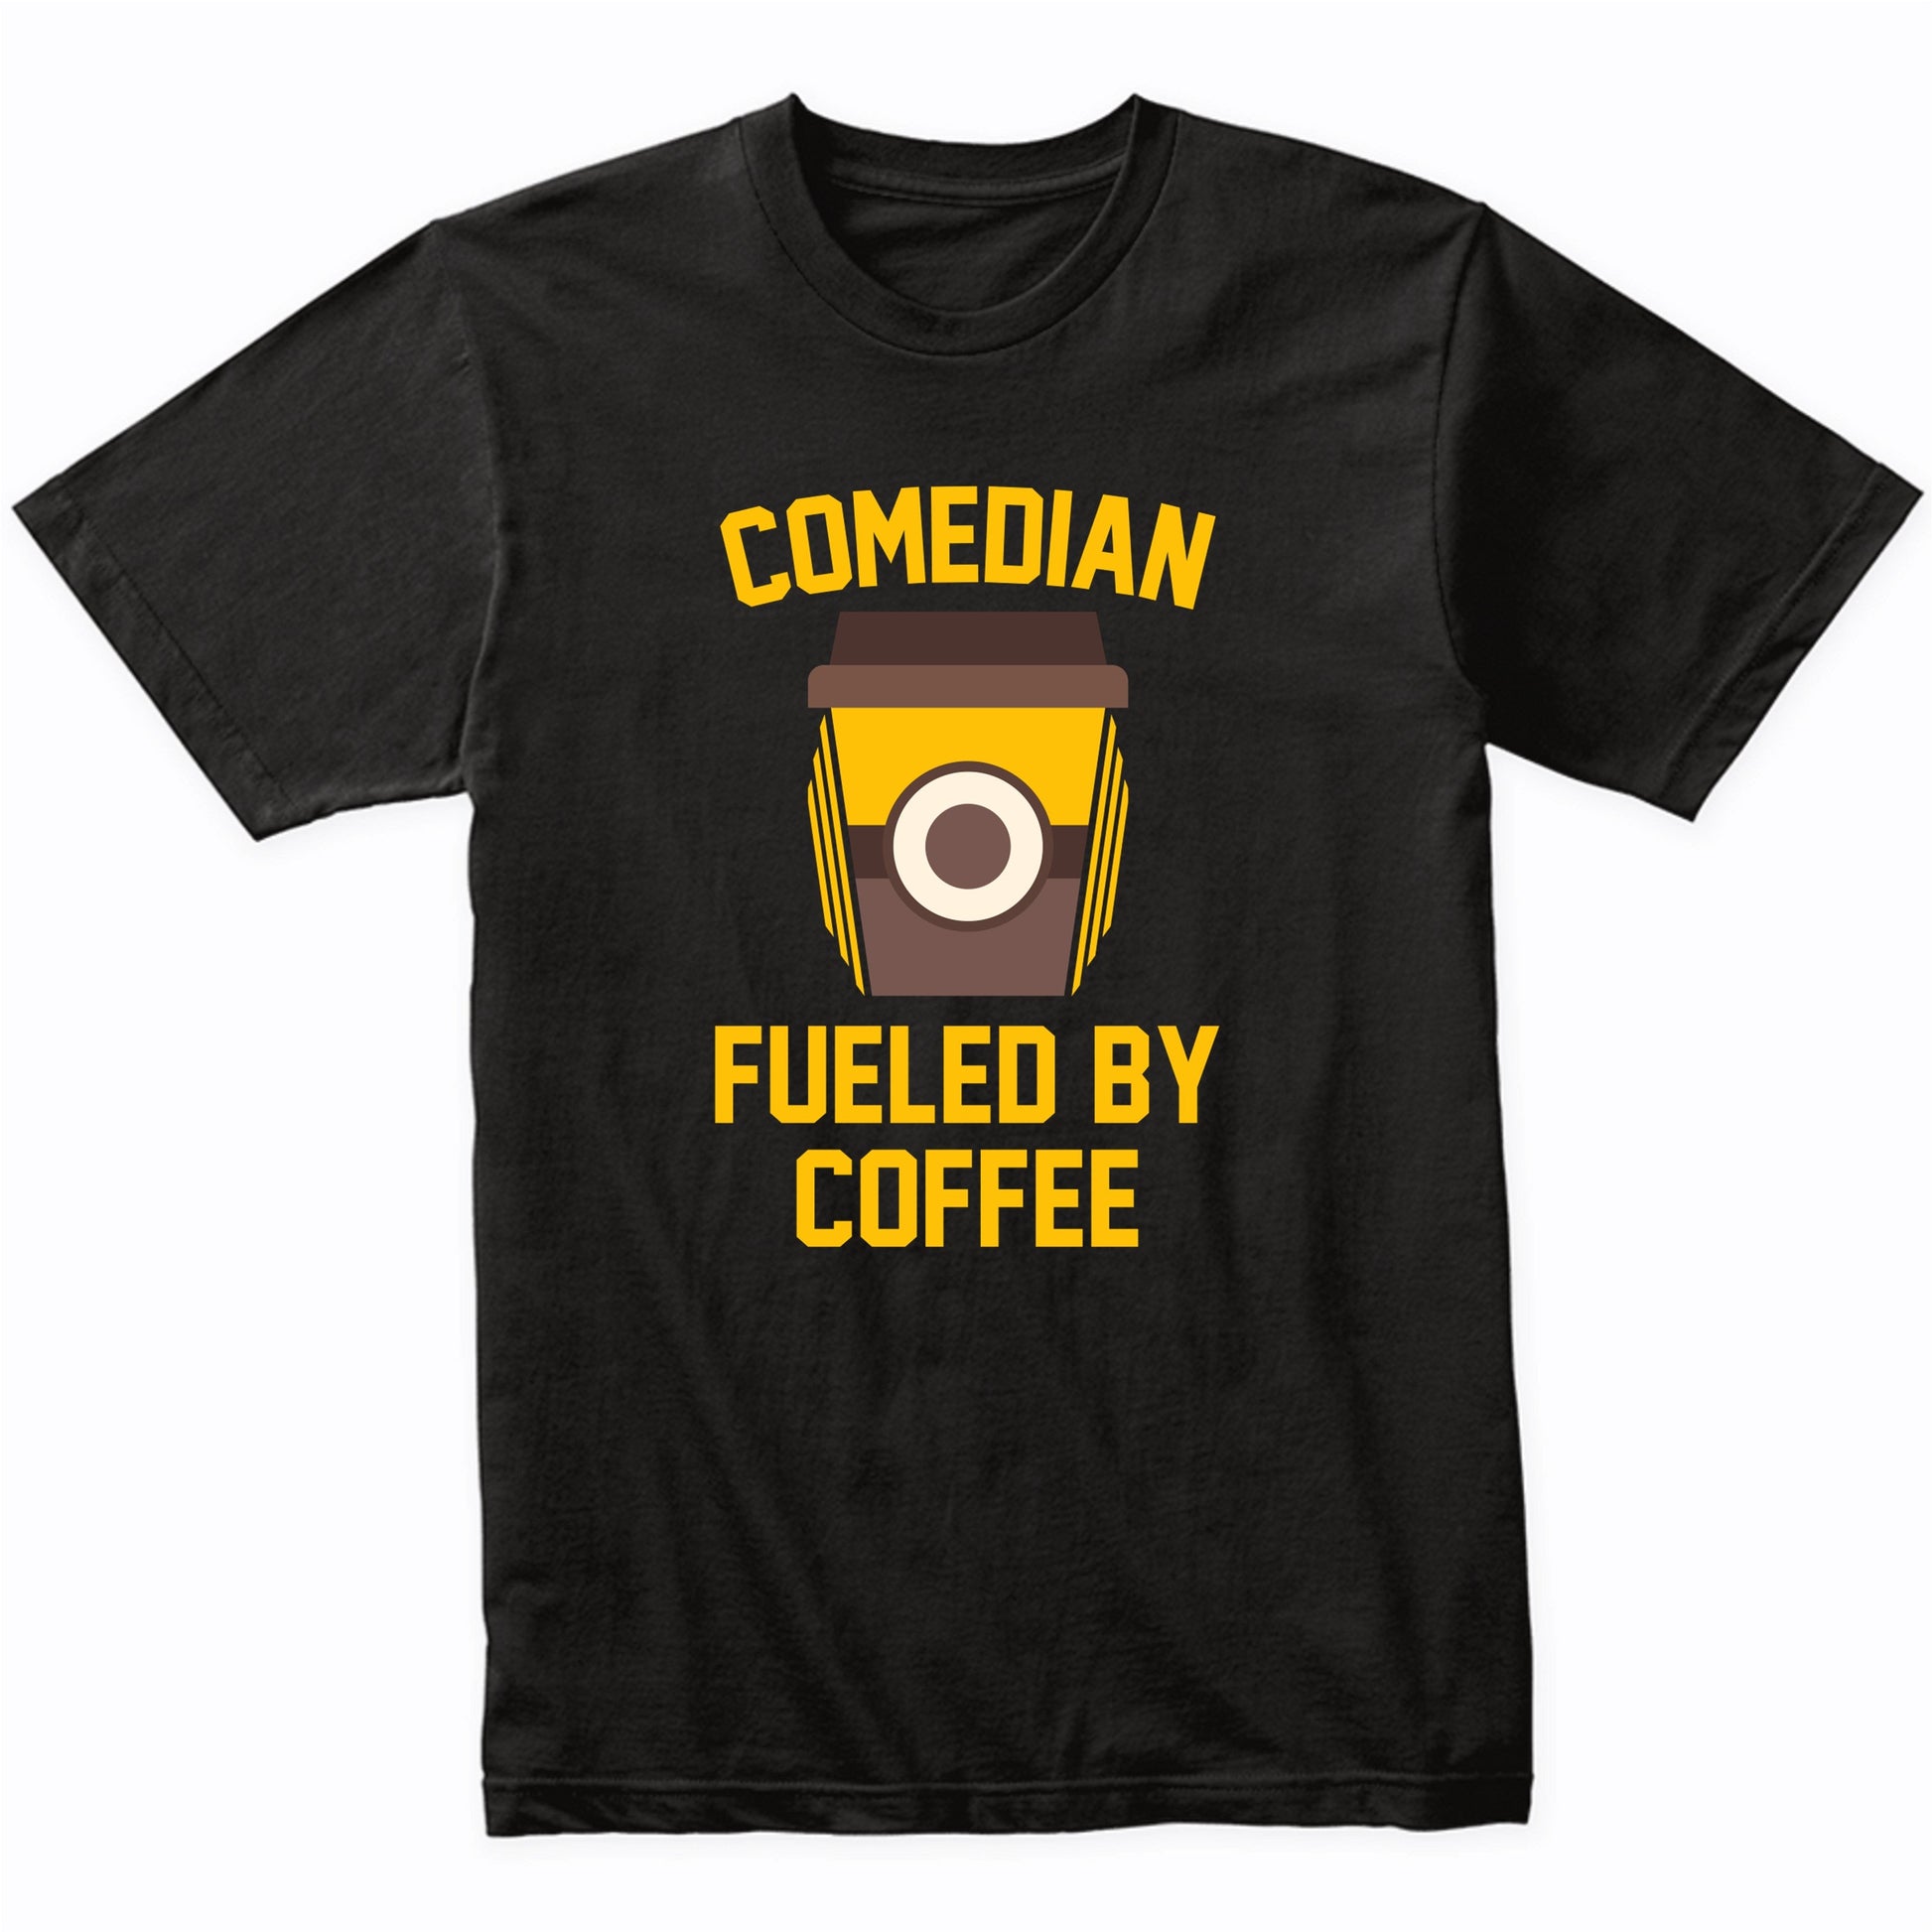 Comedian Fueled By Coffee Funny Comedy Shirt